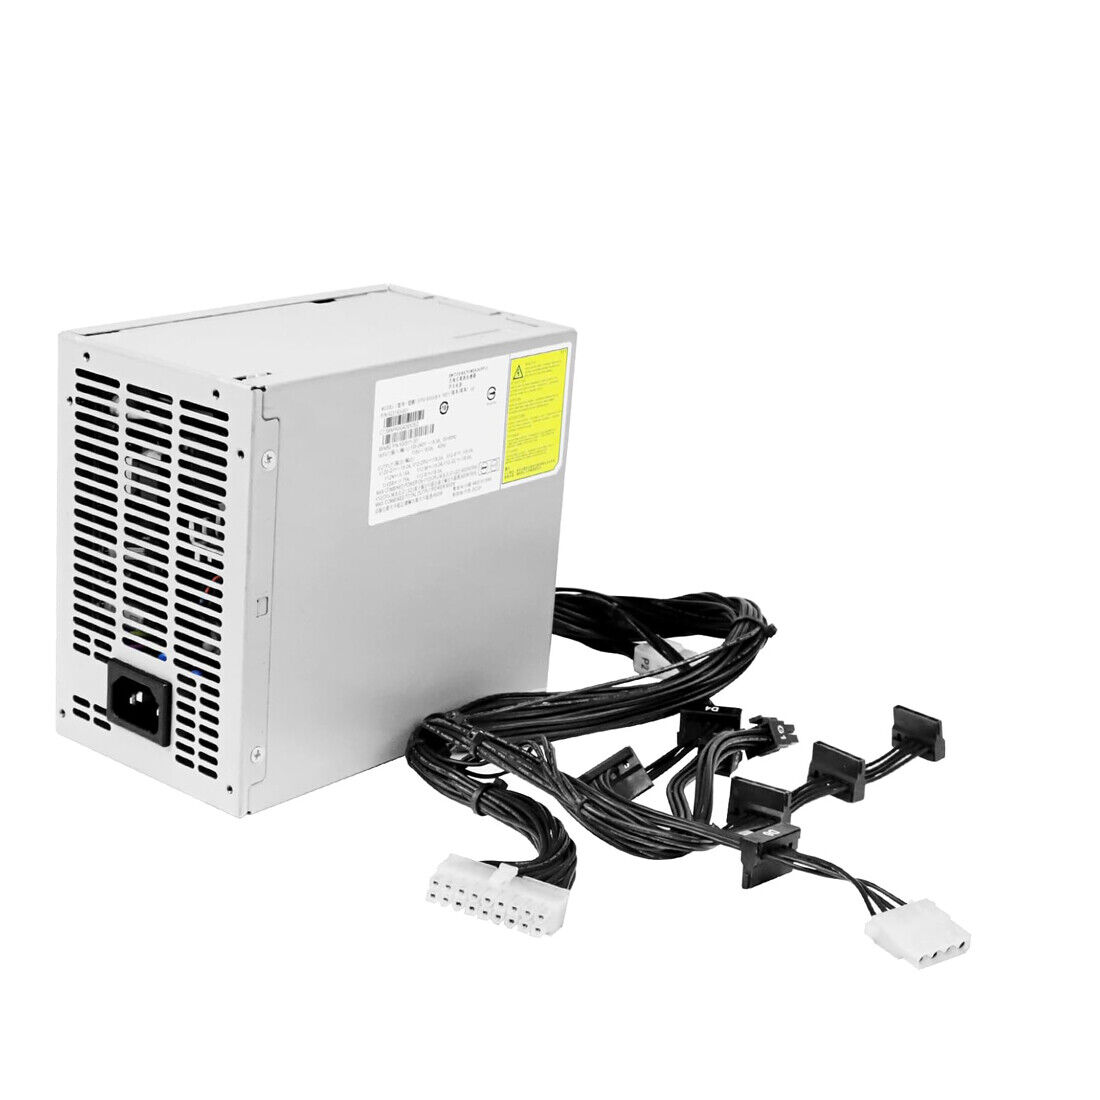 New DPS-600UB A 600W Fors HP Z420 632911-001 632911-003 623193-003 Power Supply